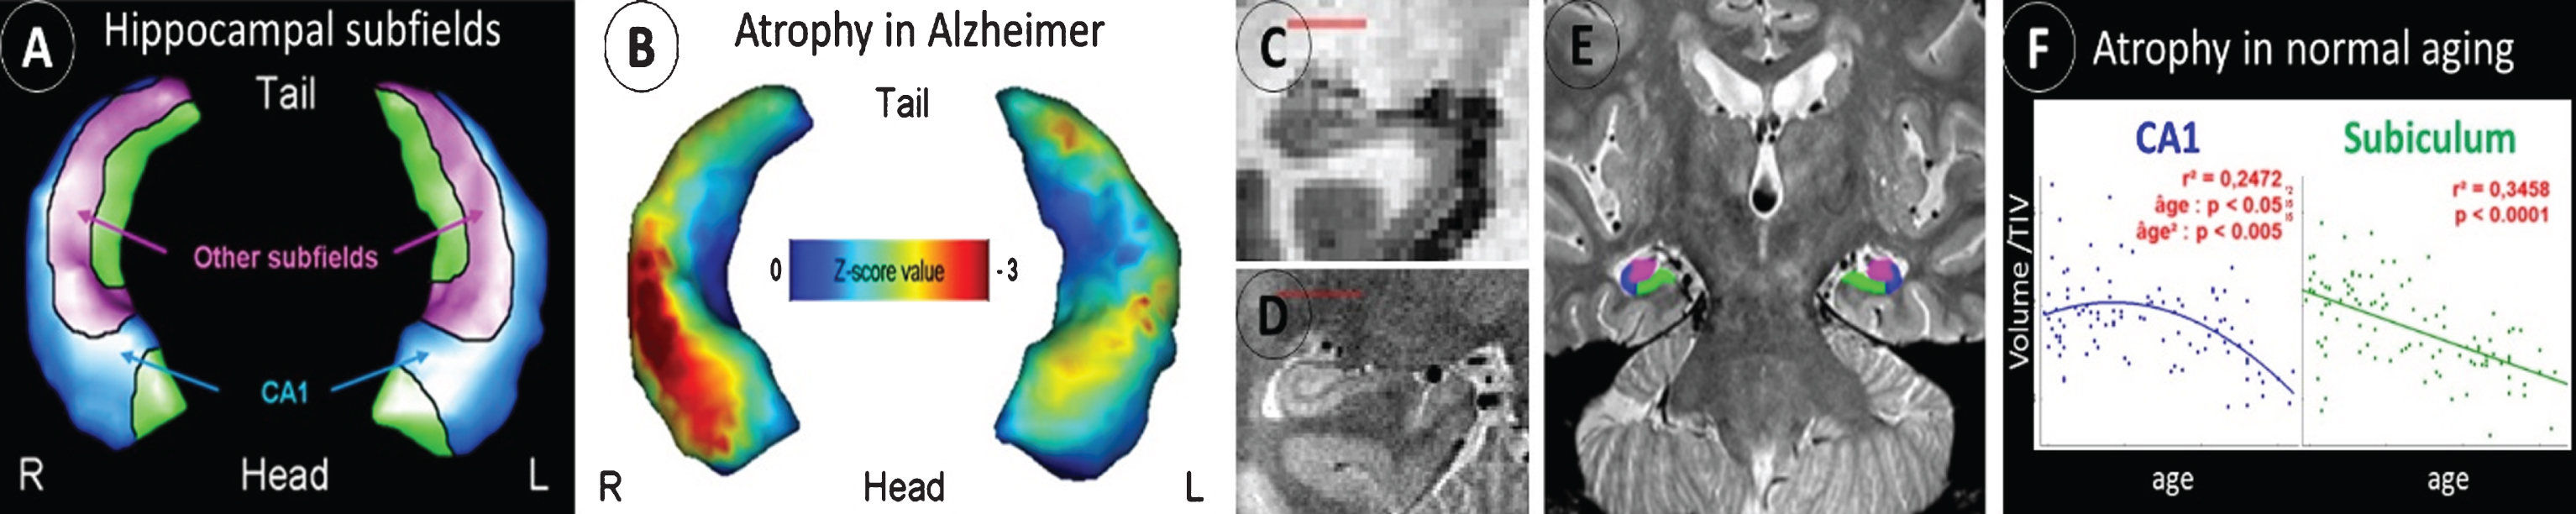 Differential alteration of hippocampal subfields in AD versus normal aging. The hippocampal subfields can be distinguished on 3D hippocampal surface views (A), and this technique showed predominant atrophy of the CA1 subfield in AD (B). Compared to standard resolution T1 MRI (C), a high-resolution proton density MRI sequence allows to visualize the hippocampus fine anatomy (D) and thus to delineate the different hippocampal subfields (E). This approach is promising for early AD diagnosis as it allows to distinguish the effects of AD from that of other conditions such as normal aging (F).